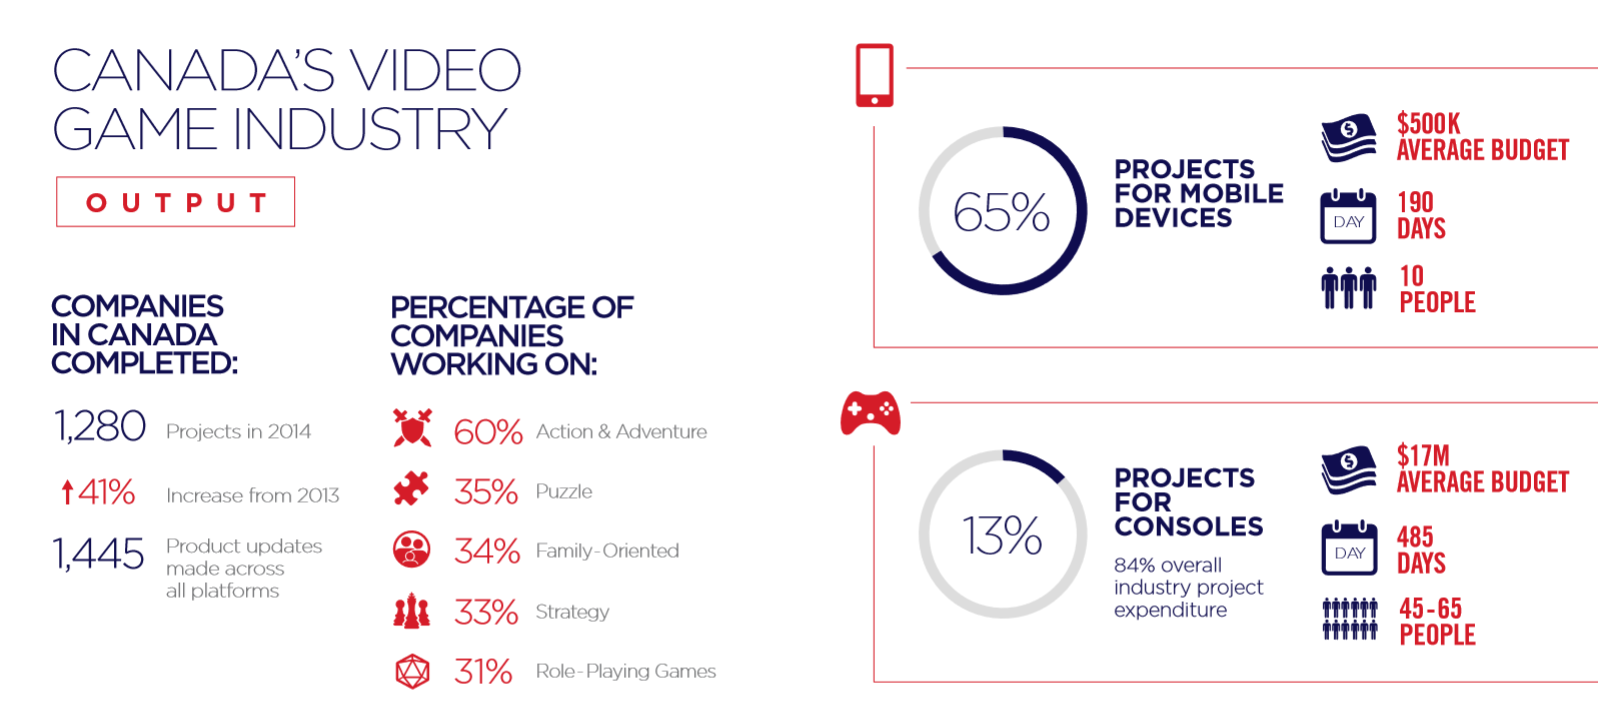 Mobile-video-game-sales-in-Canada-close-in-on-sales-of-console-games